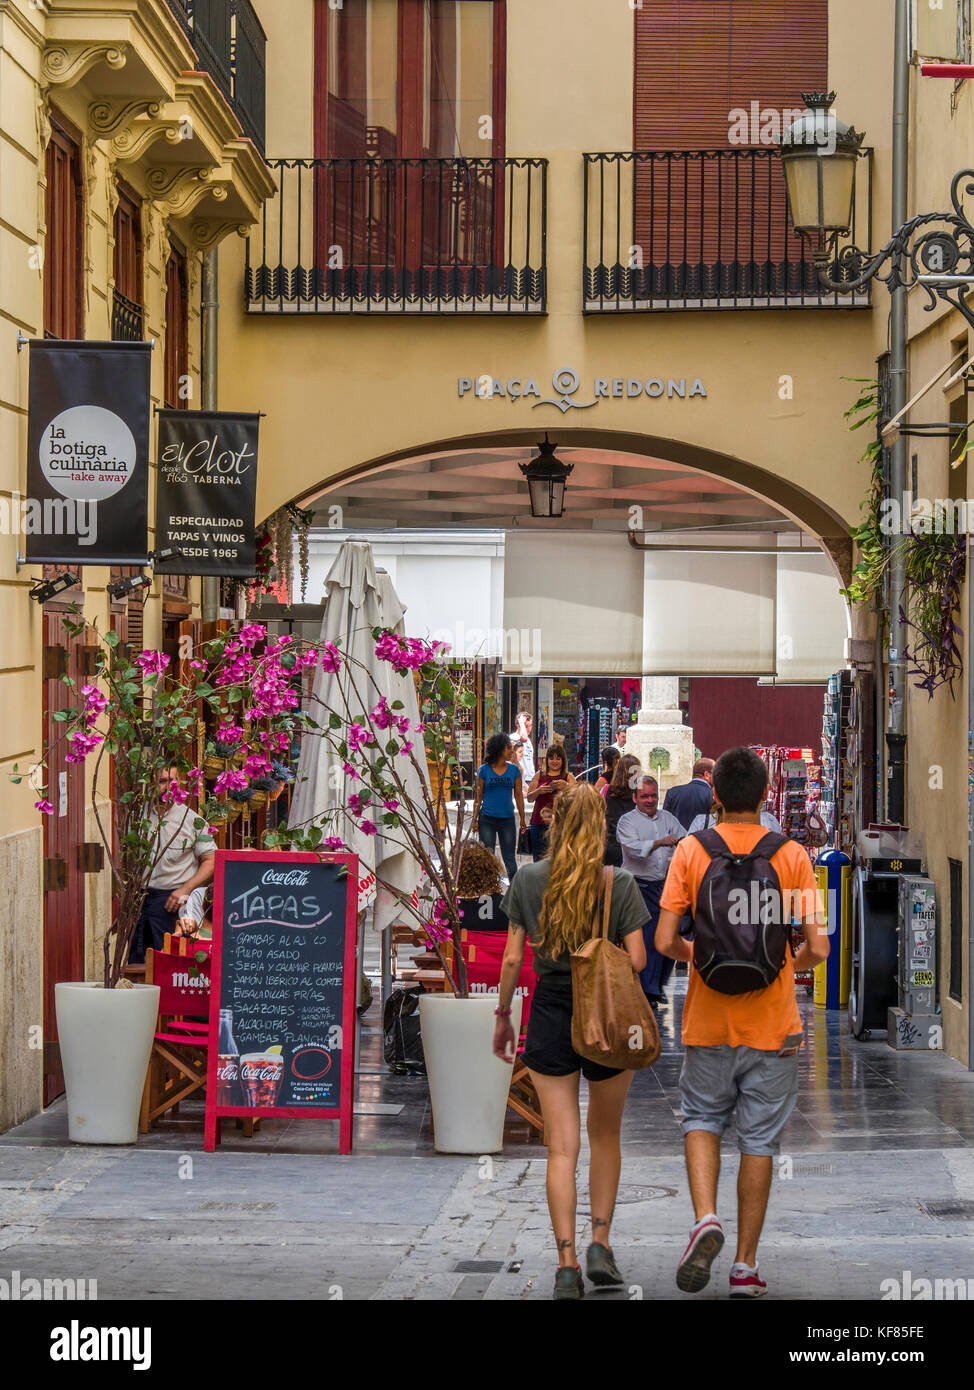 Two people walking towards Plaça Redona, a circular pedestrianised area containing boutique stalls, shops and tapas bars, Valencia, Spain Stock Photo